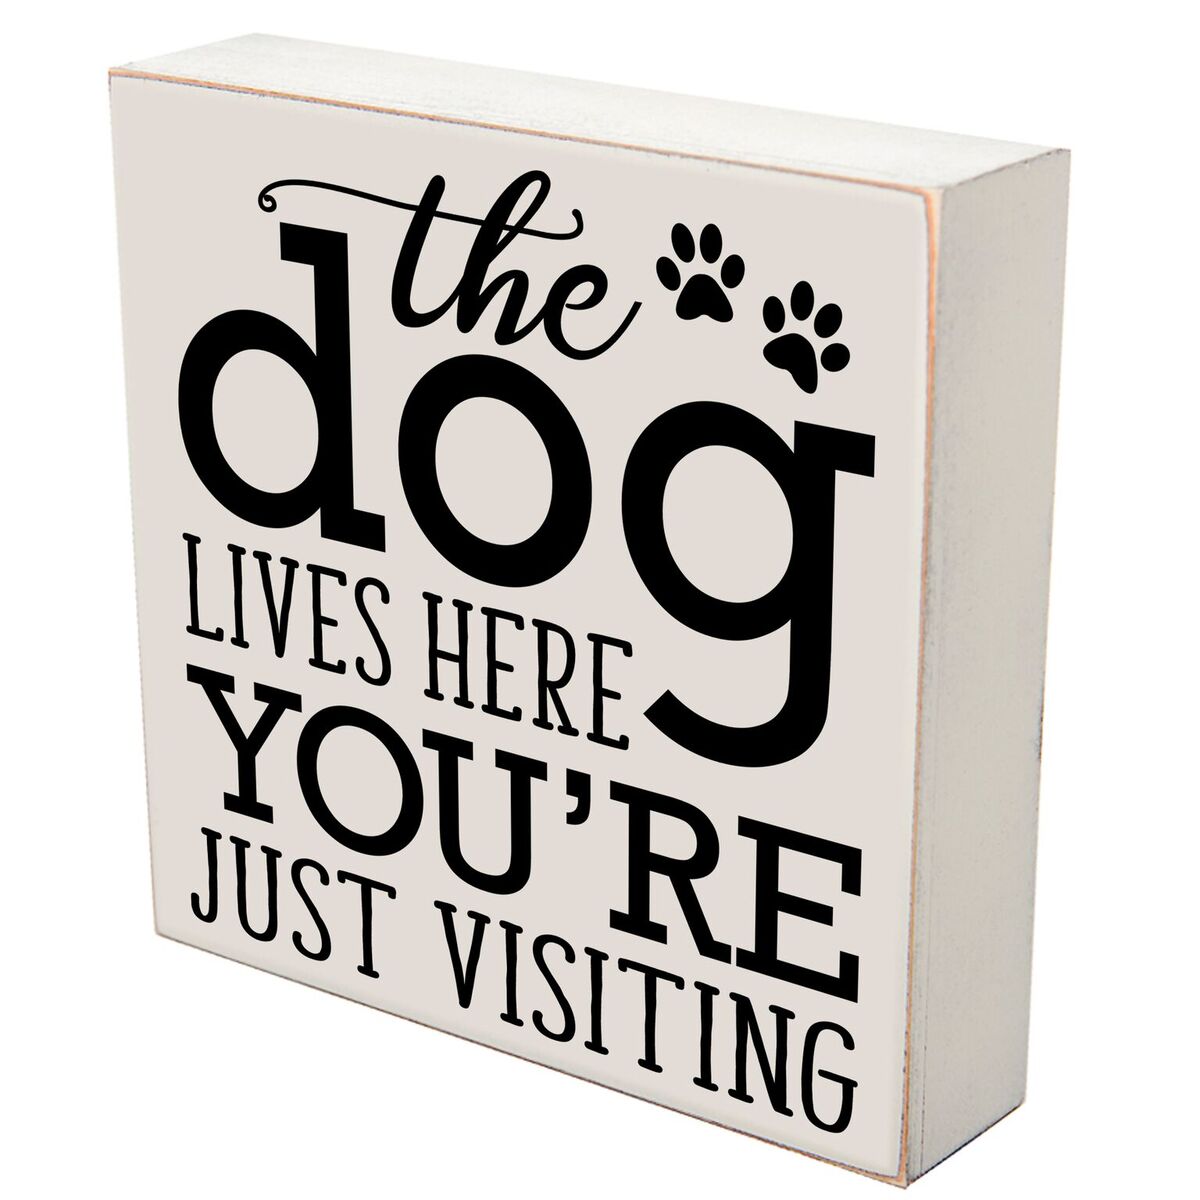 Digitally printed 6 inches pet shadow box for home decoration